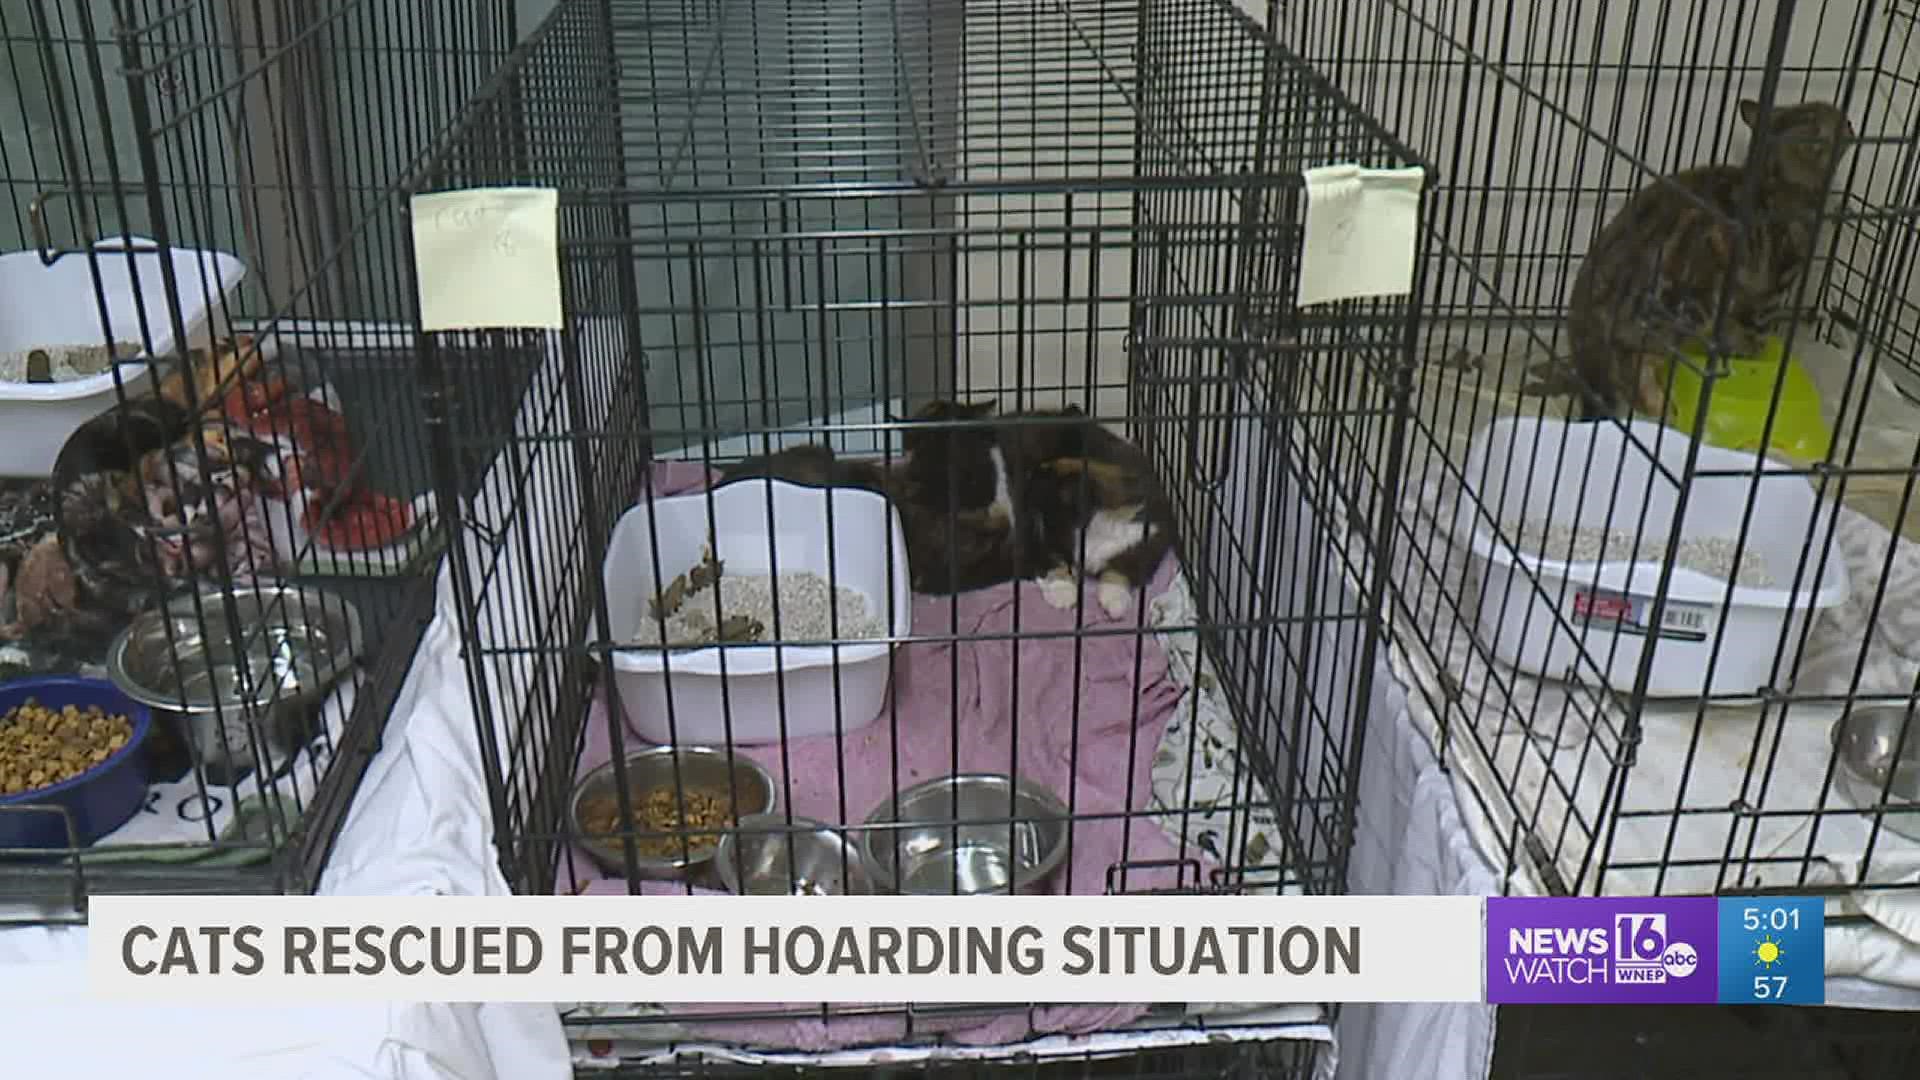 Officials at Griffin Pond Animal Shelter near Clarks Summit are asking for help caring for dozens of cats they took in on Thursday.